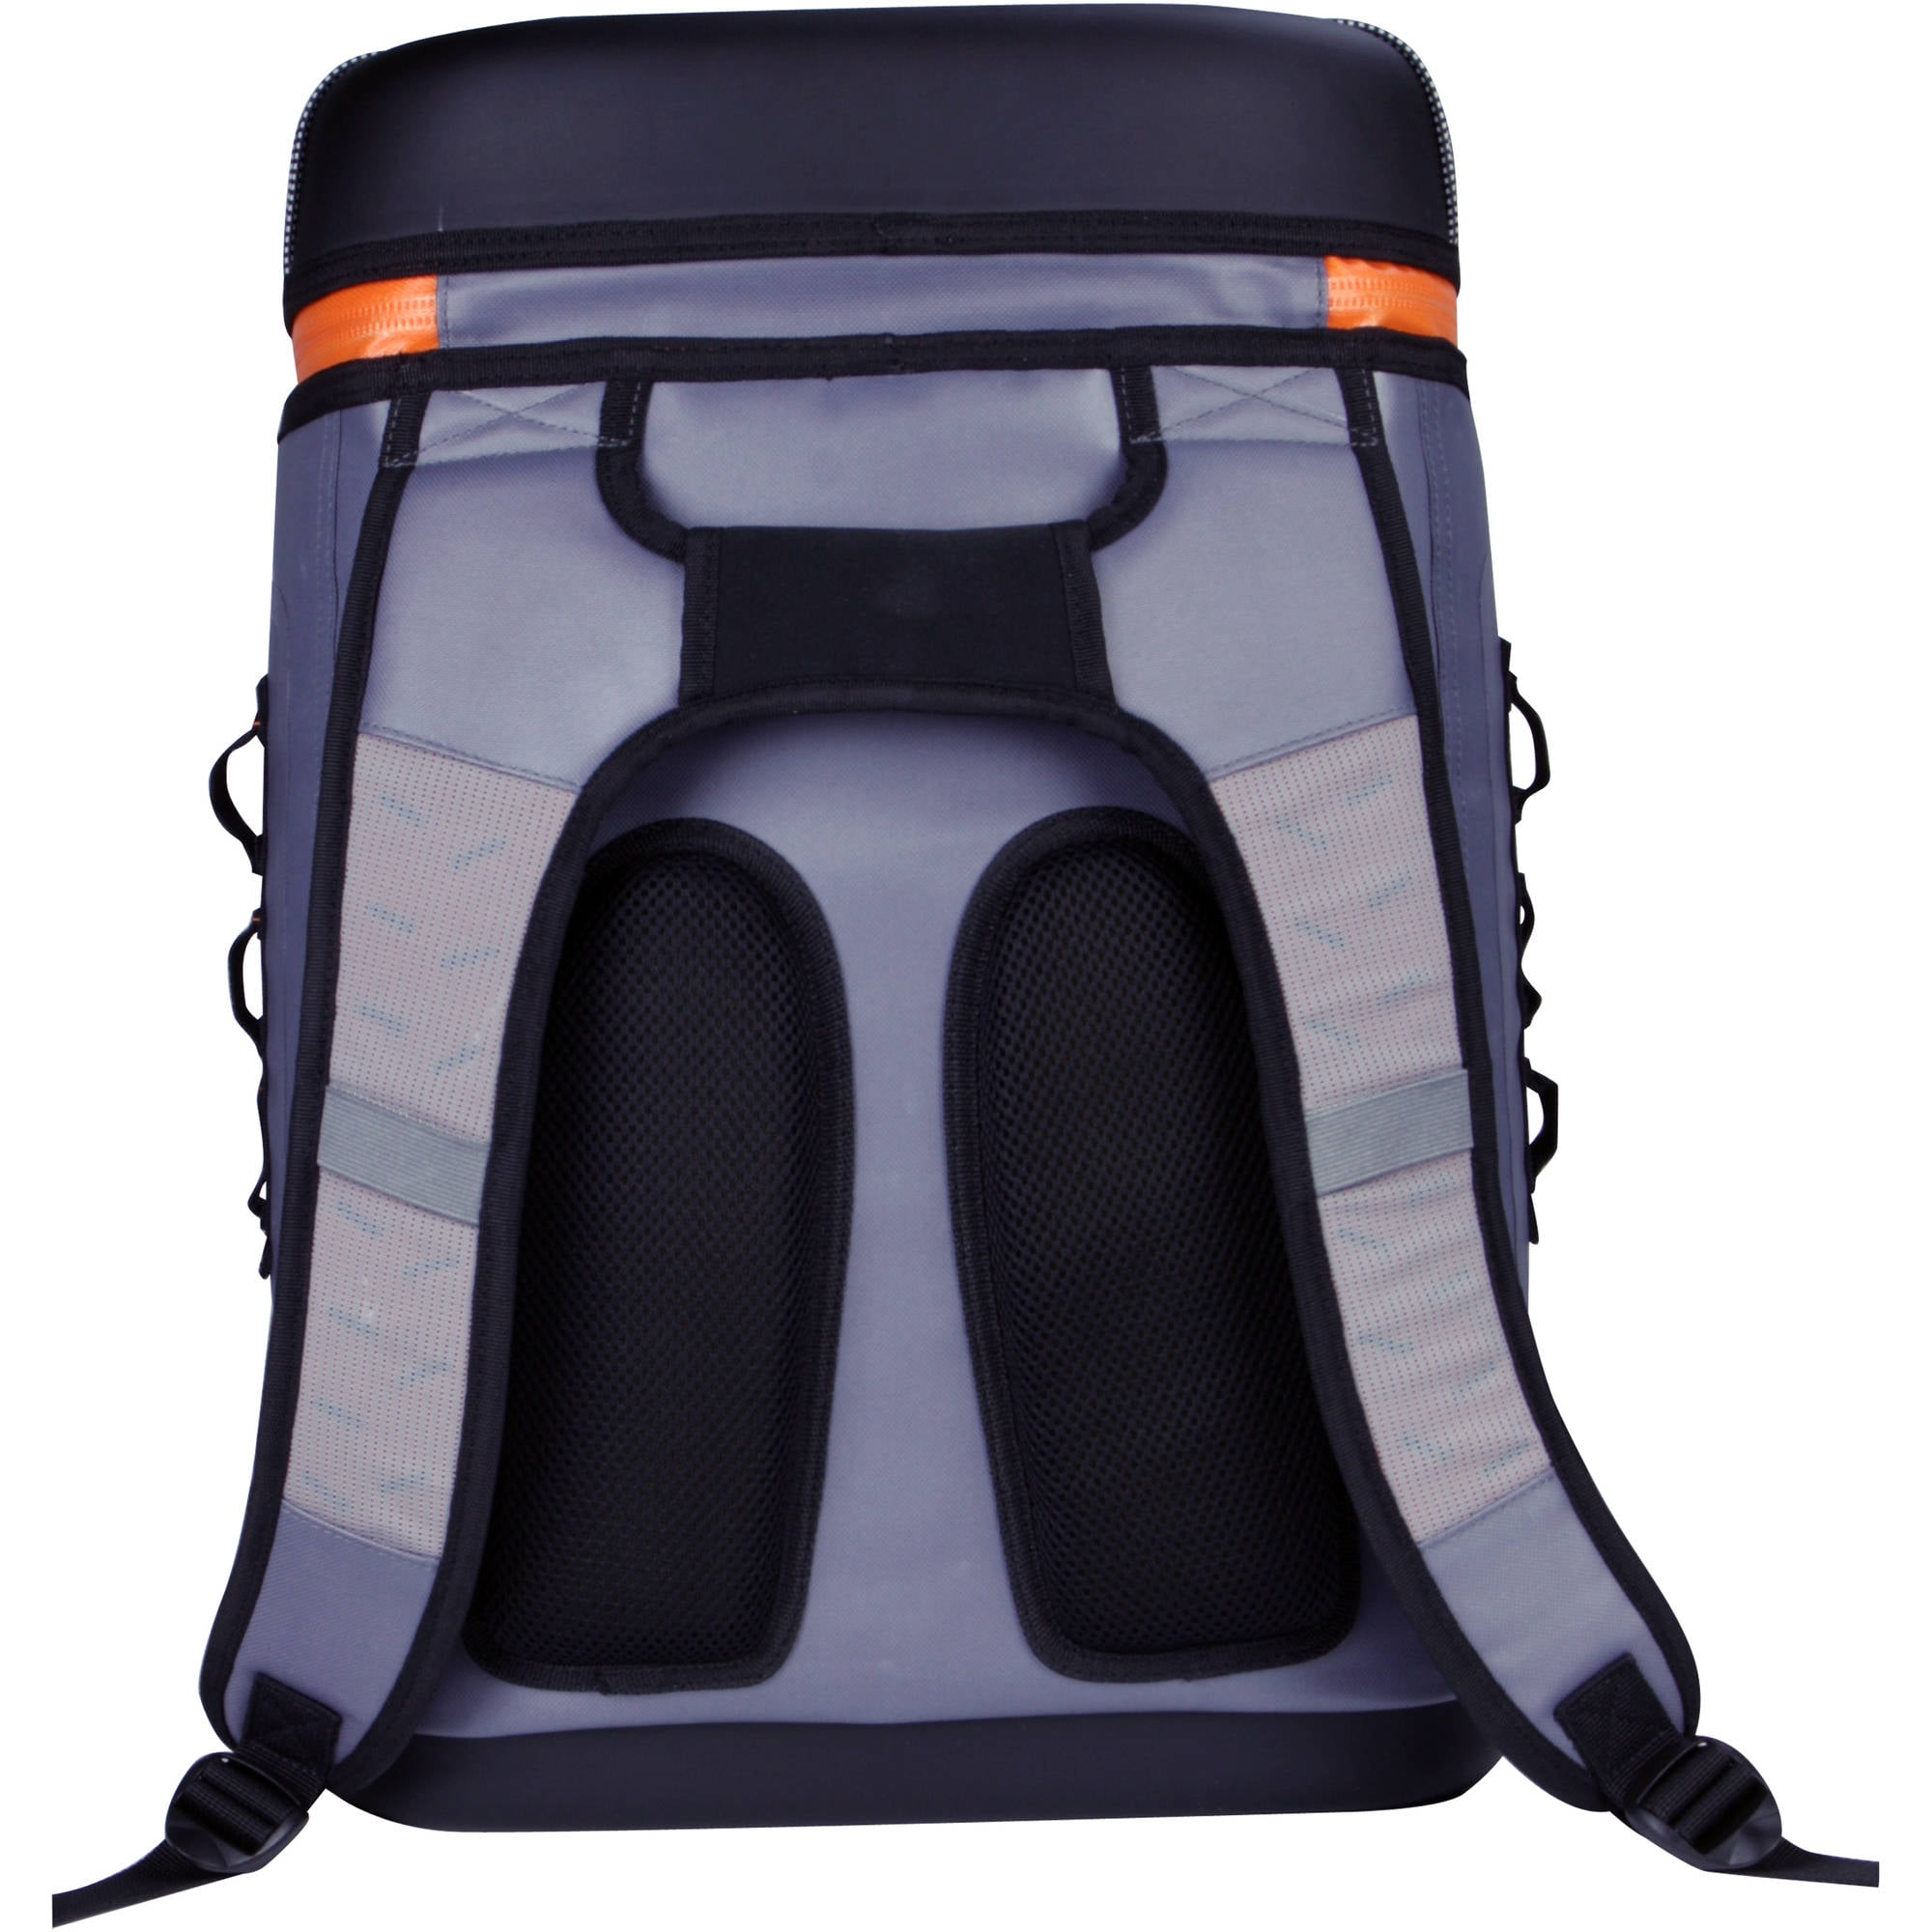 Ozark Trail Insulated Backpack Factory Sale, 58% OFF | a4accounting.com.au